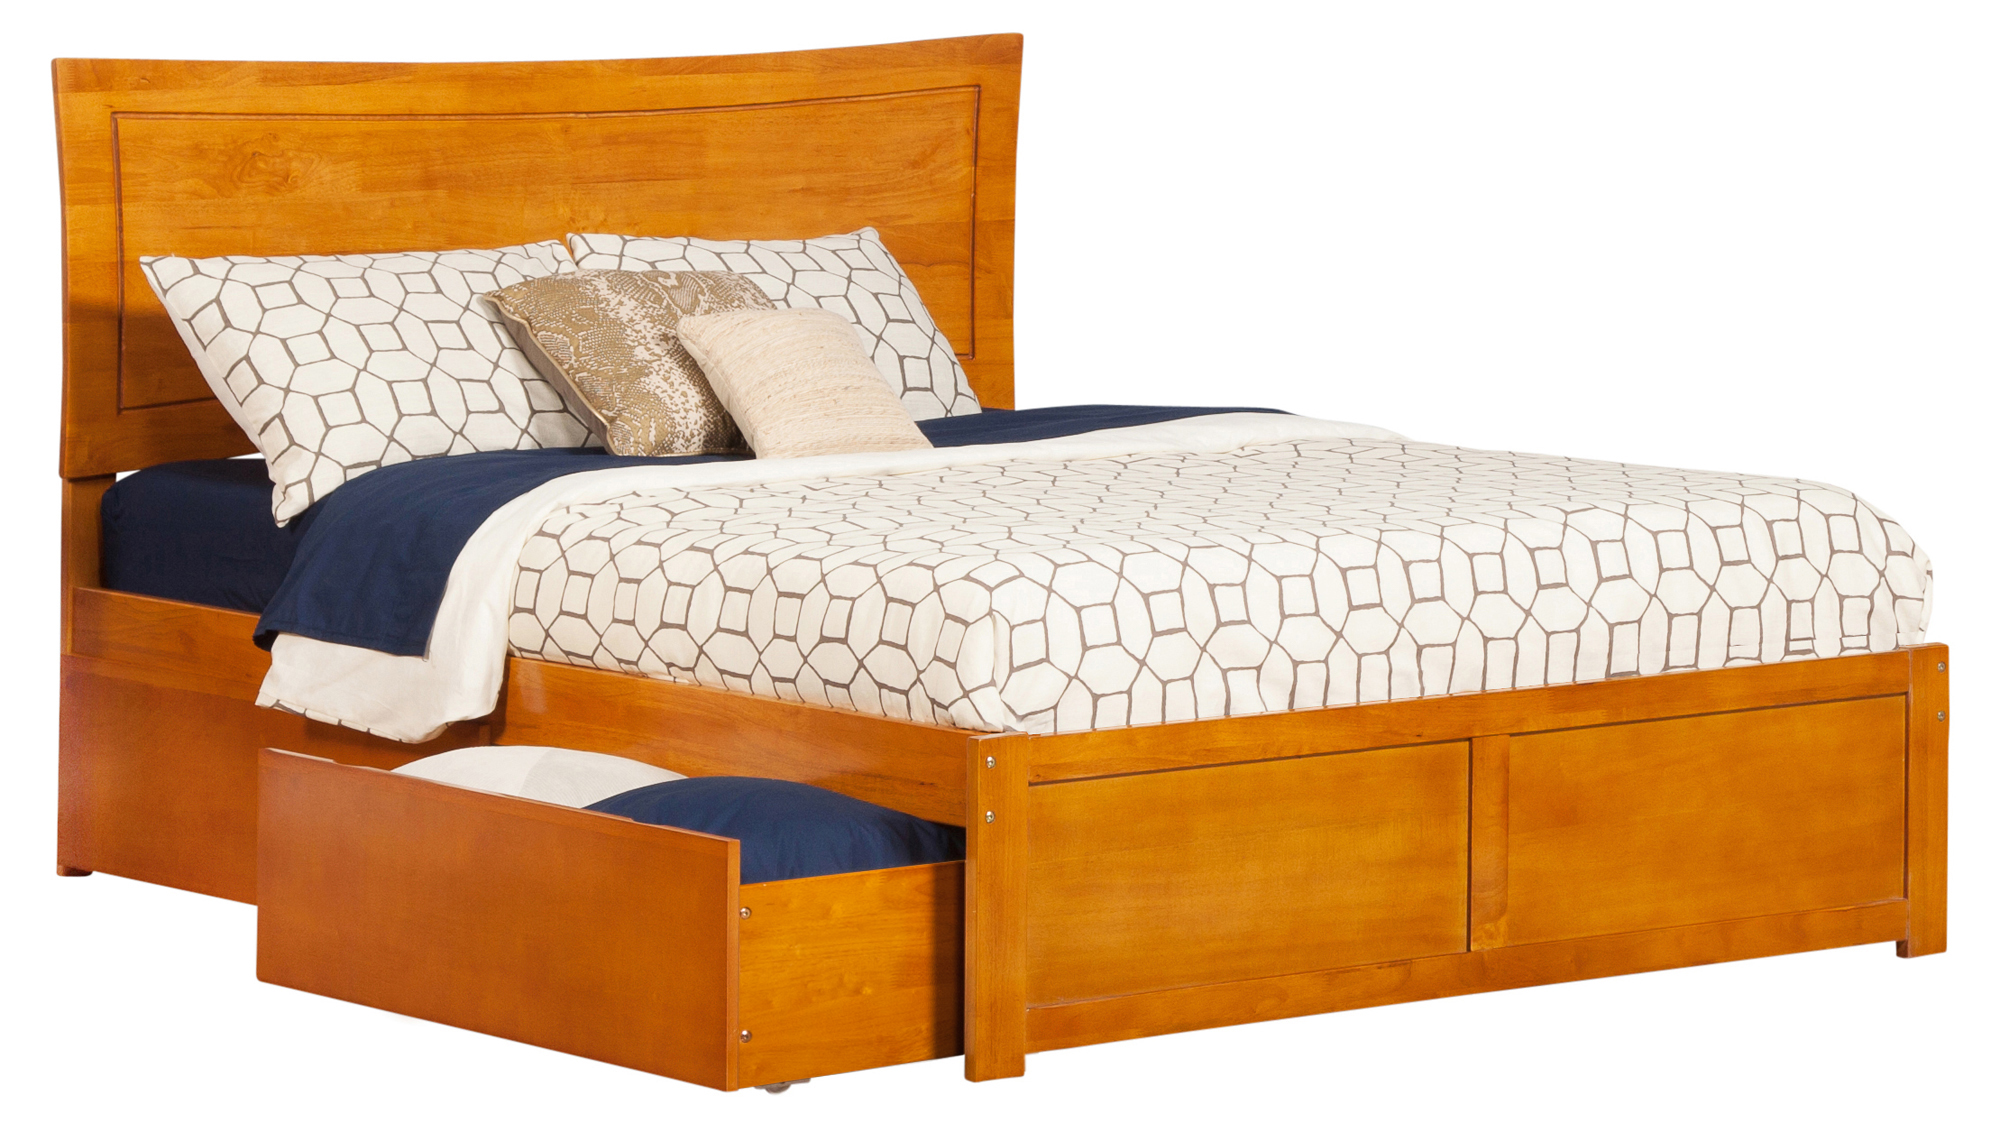 Metro Queen Platform Platform Bed with Flat Panel Foot Board and 2 Urban Bed Drawers in Caramel Latte - image 1 of 5